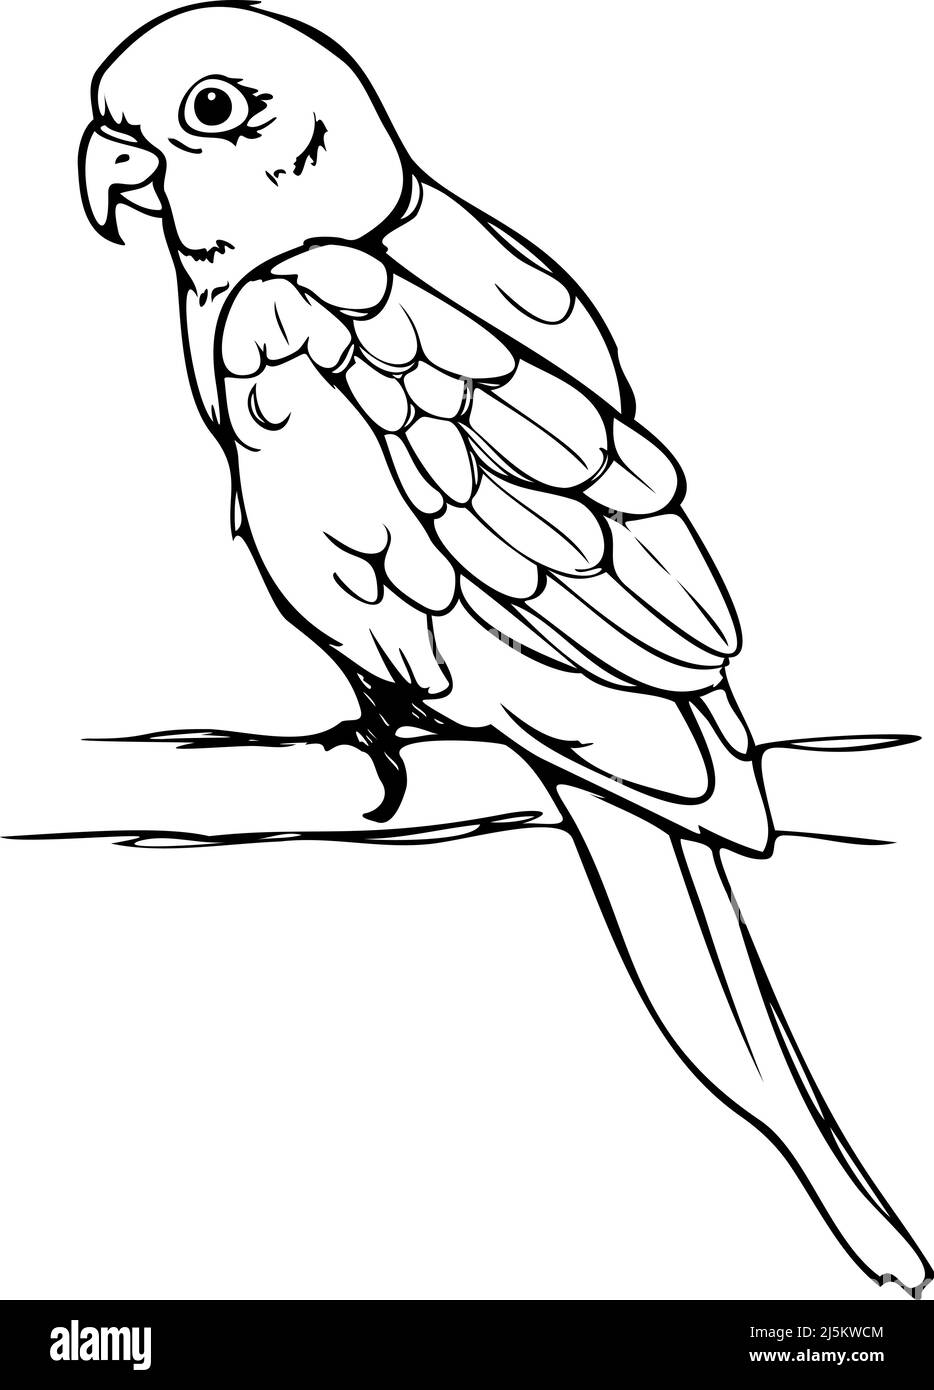 Vector illustration of hand drawn parrot. Black and white parrot sitting on branch. Stock Vector